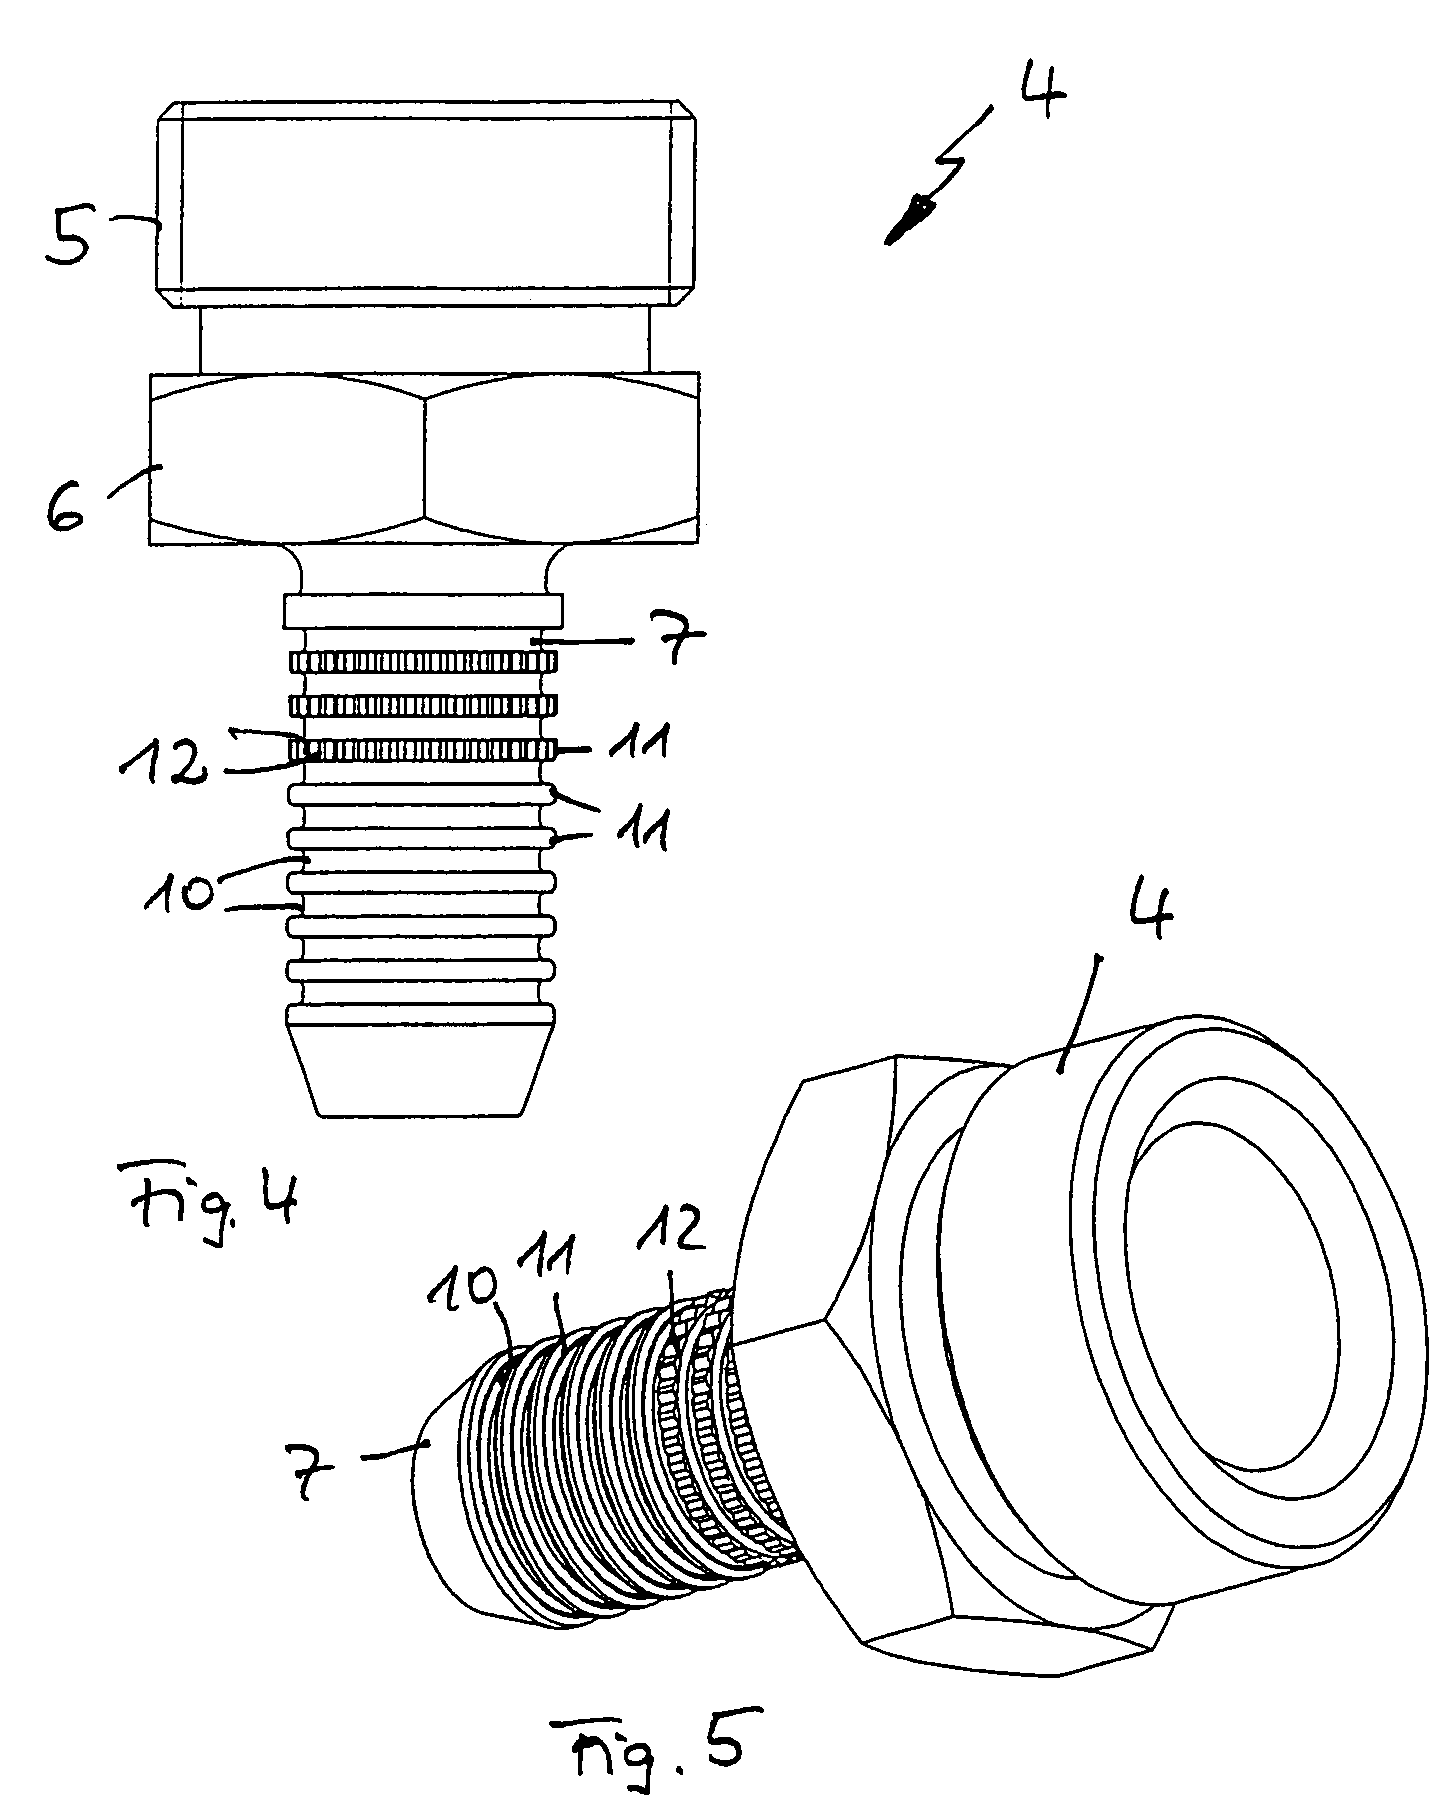 Pressure hose for a water carrying system